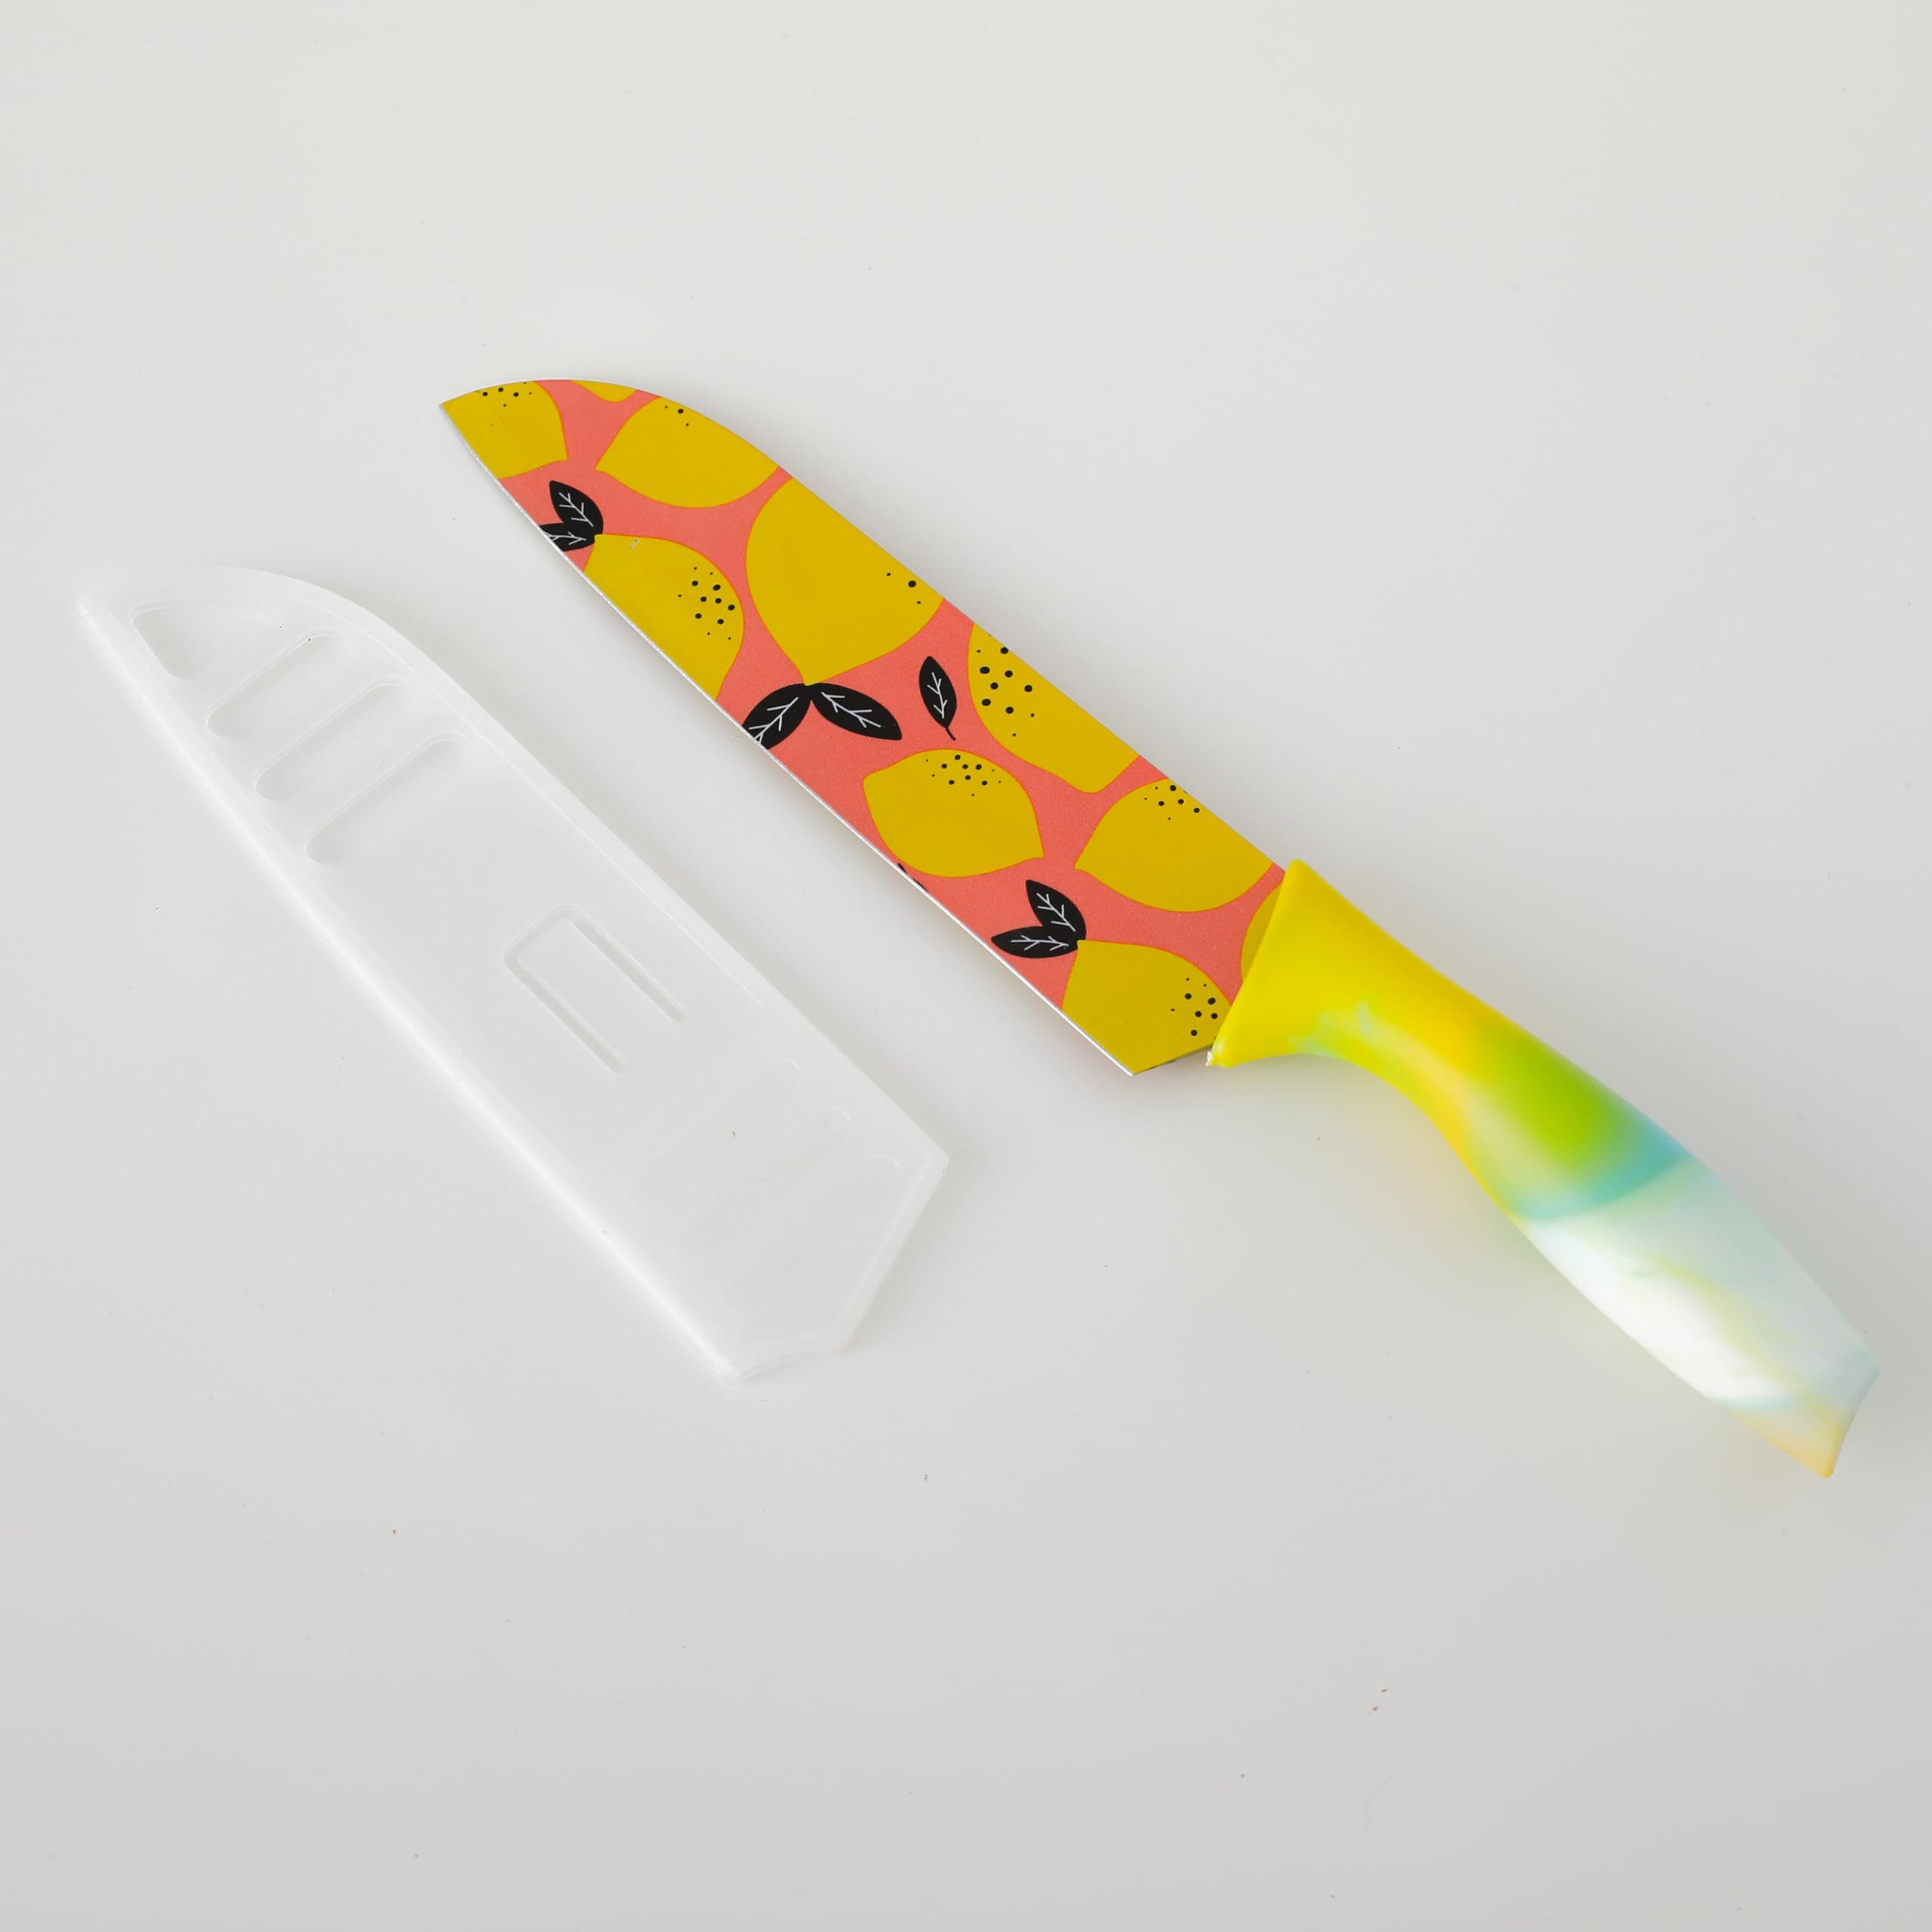 The Better Home Knife Kitchen Knife Chef Knife Color Printing Santoku Knife & Non-Slip Handle with Blade Cover,7 inch, Stainless Steel|Utility Knife. (Yellow Set of 2)